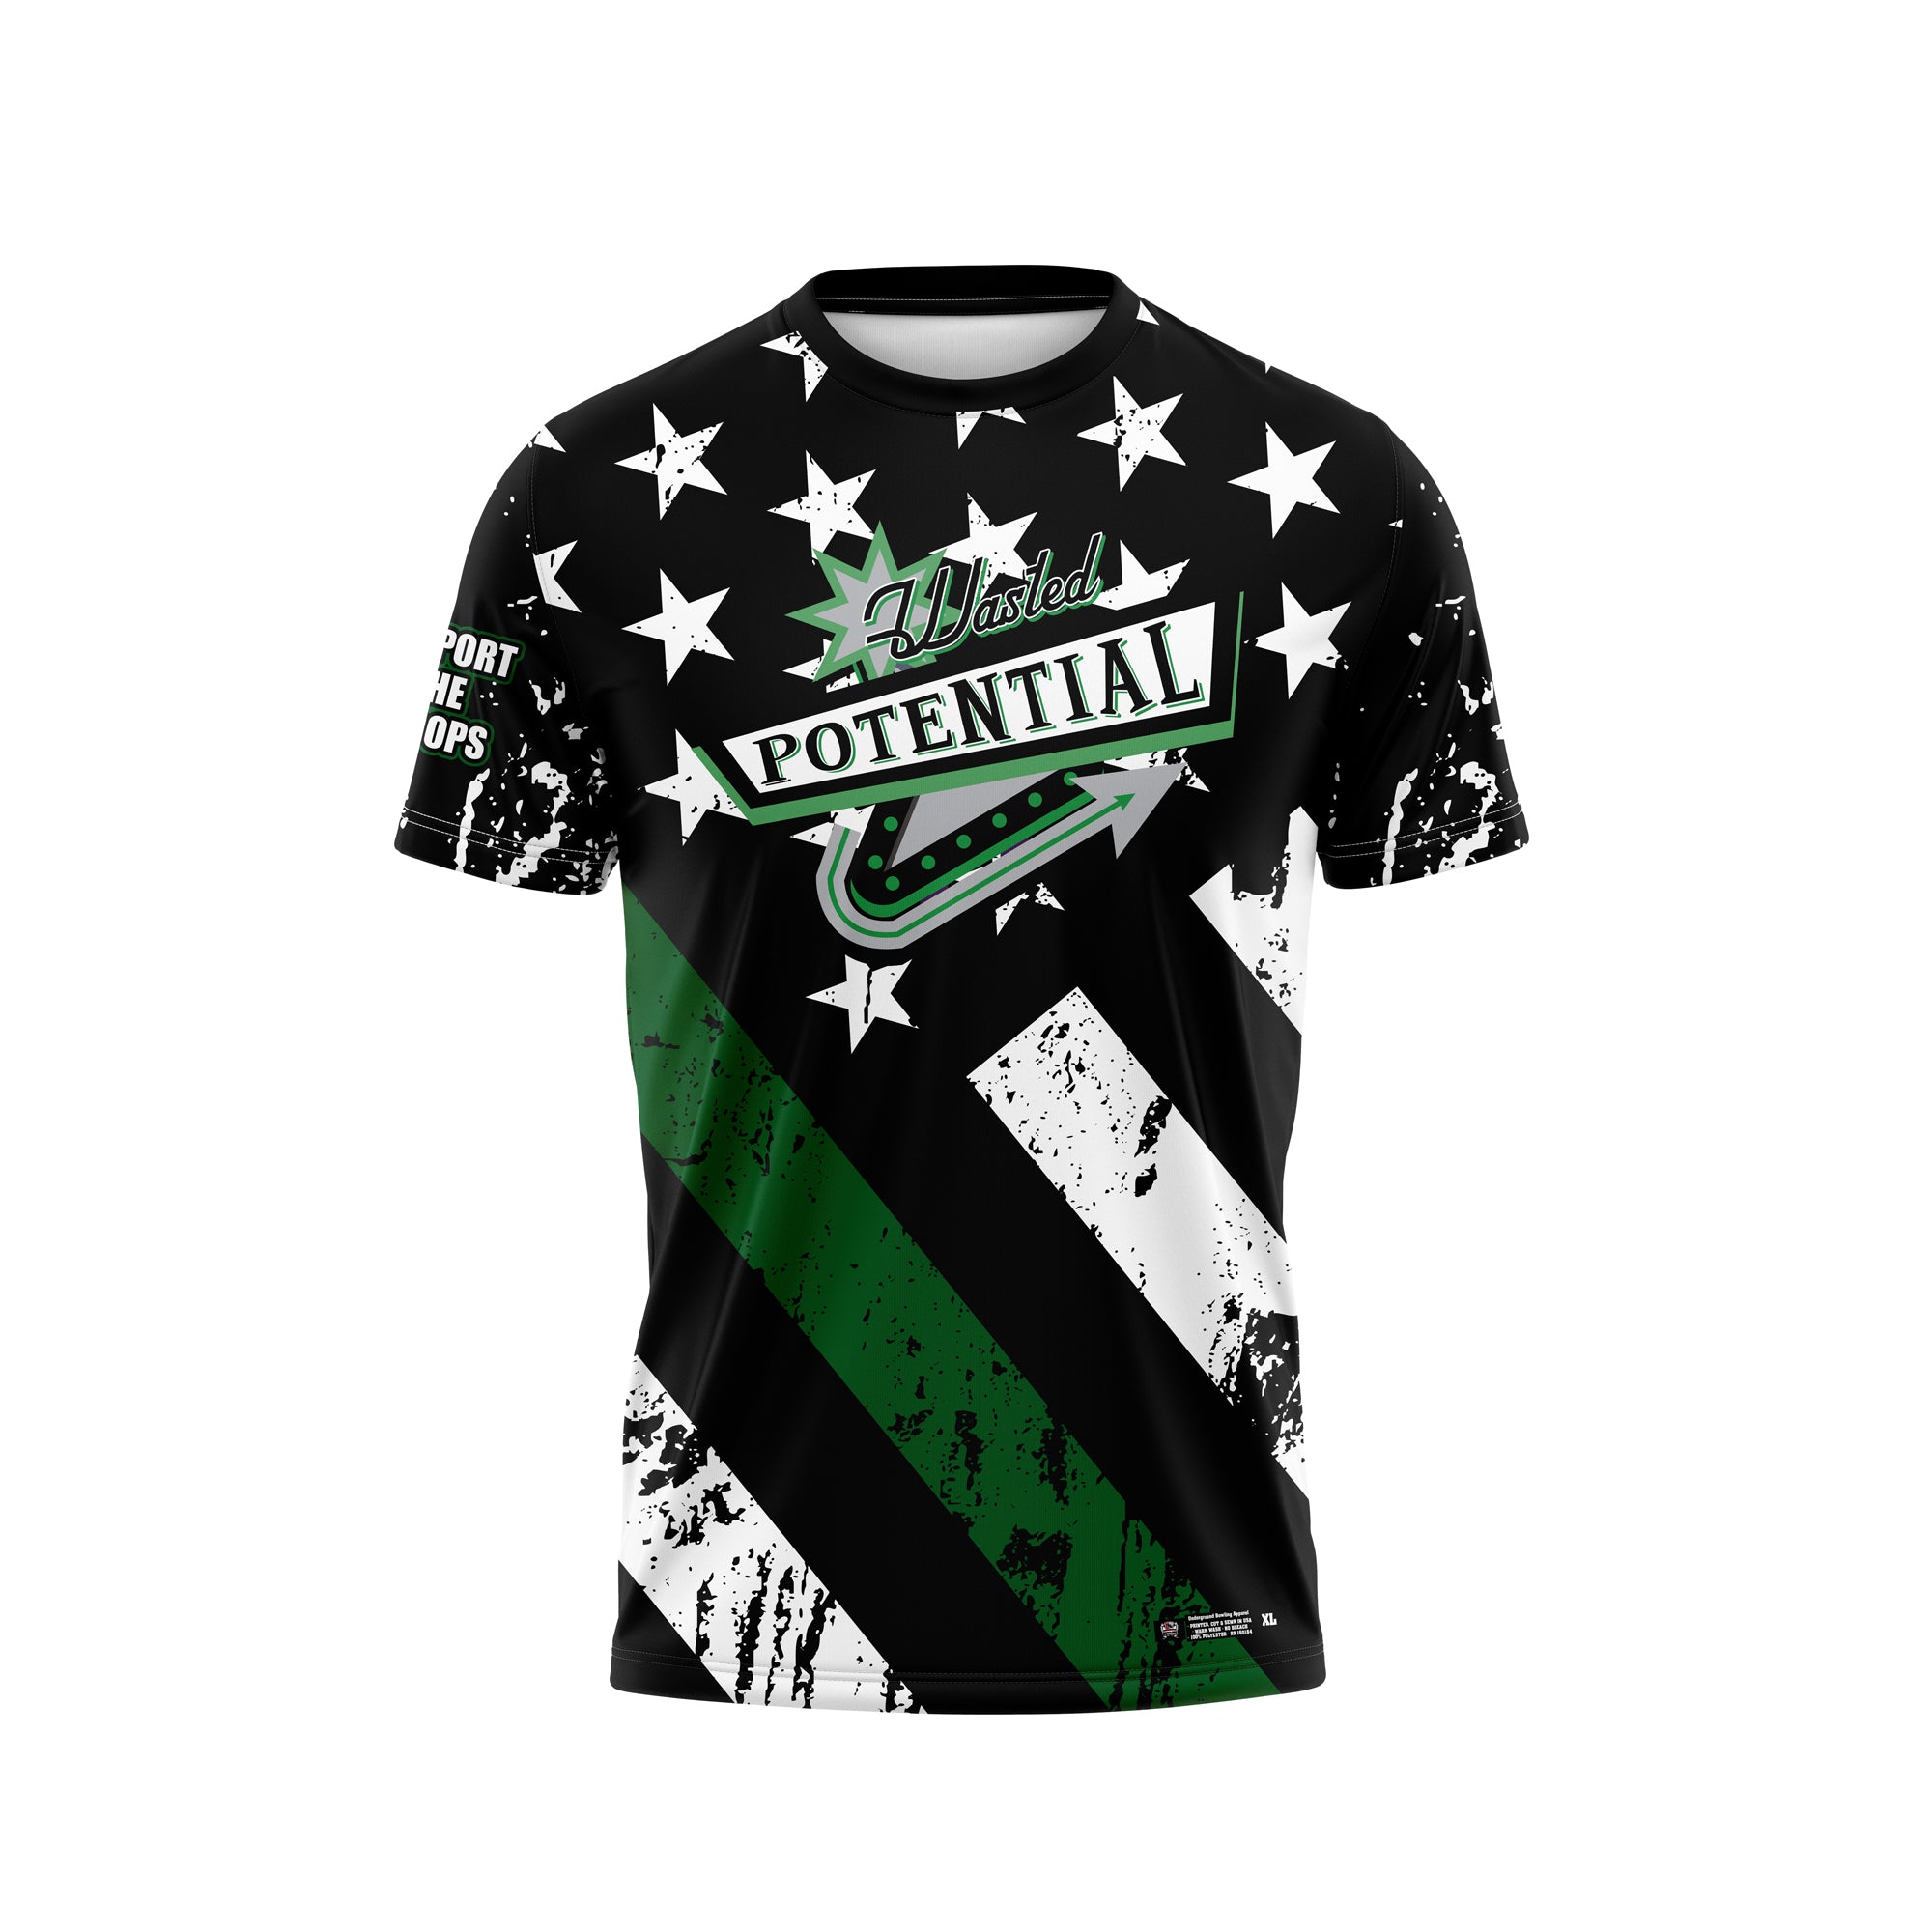 Wasted Potential Military Awareness Jersey